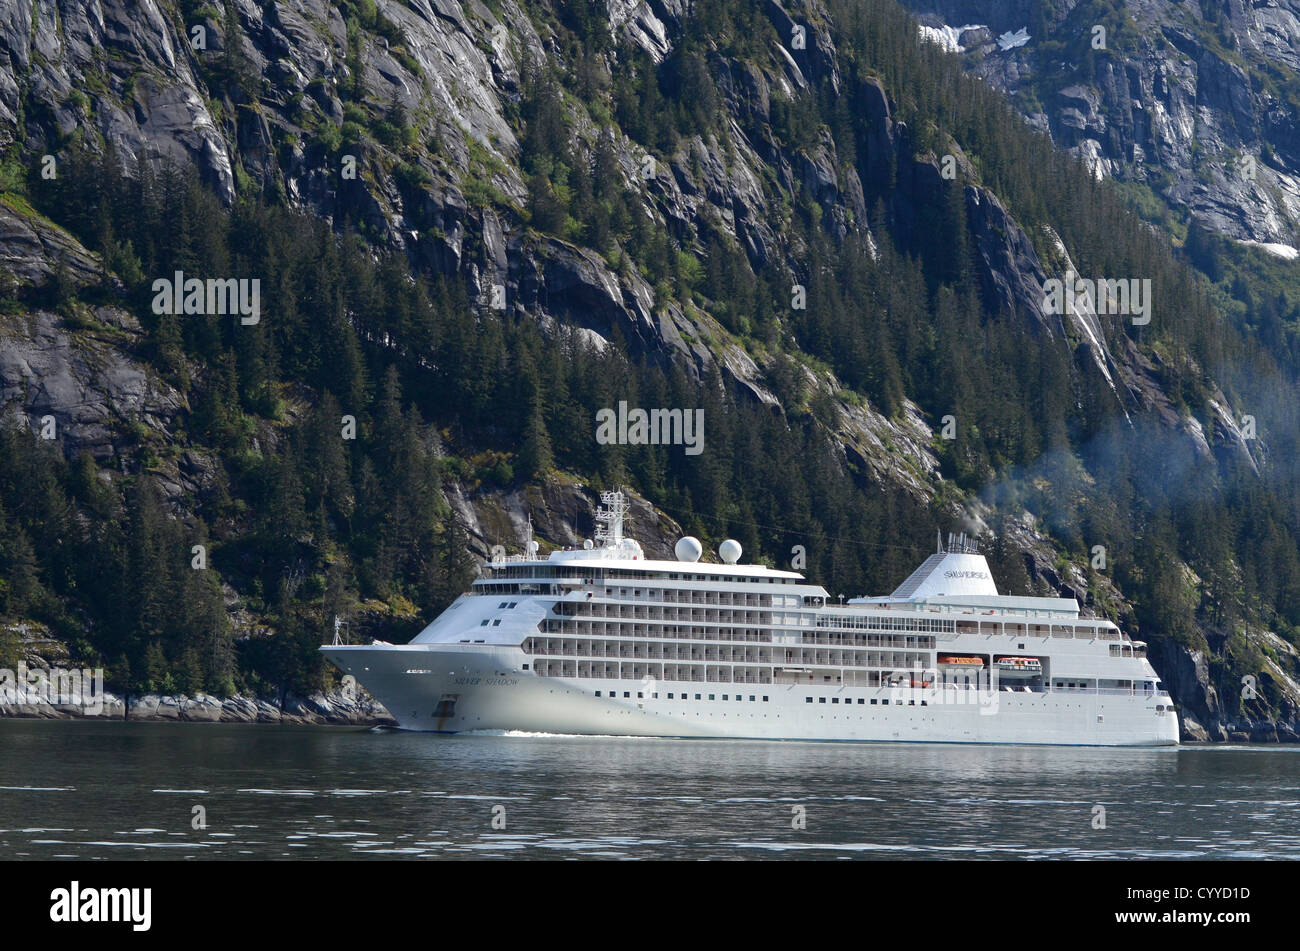 Cruise ship in Tracy Arm. Tongass National Forest, Alaska. Stock Photo